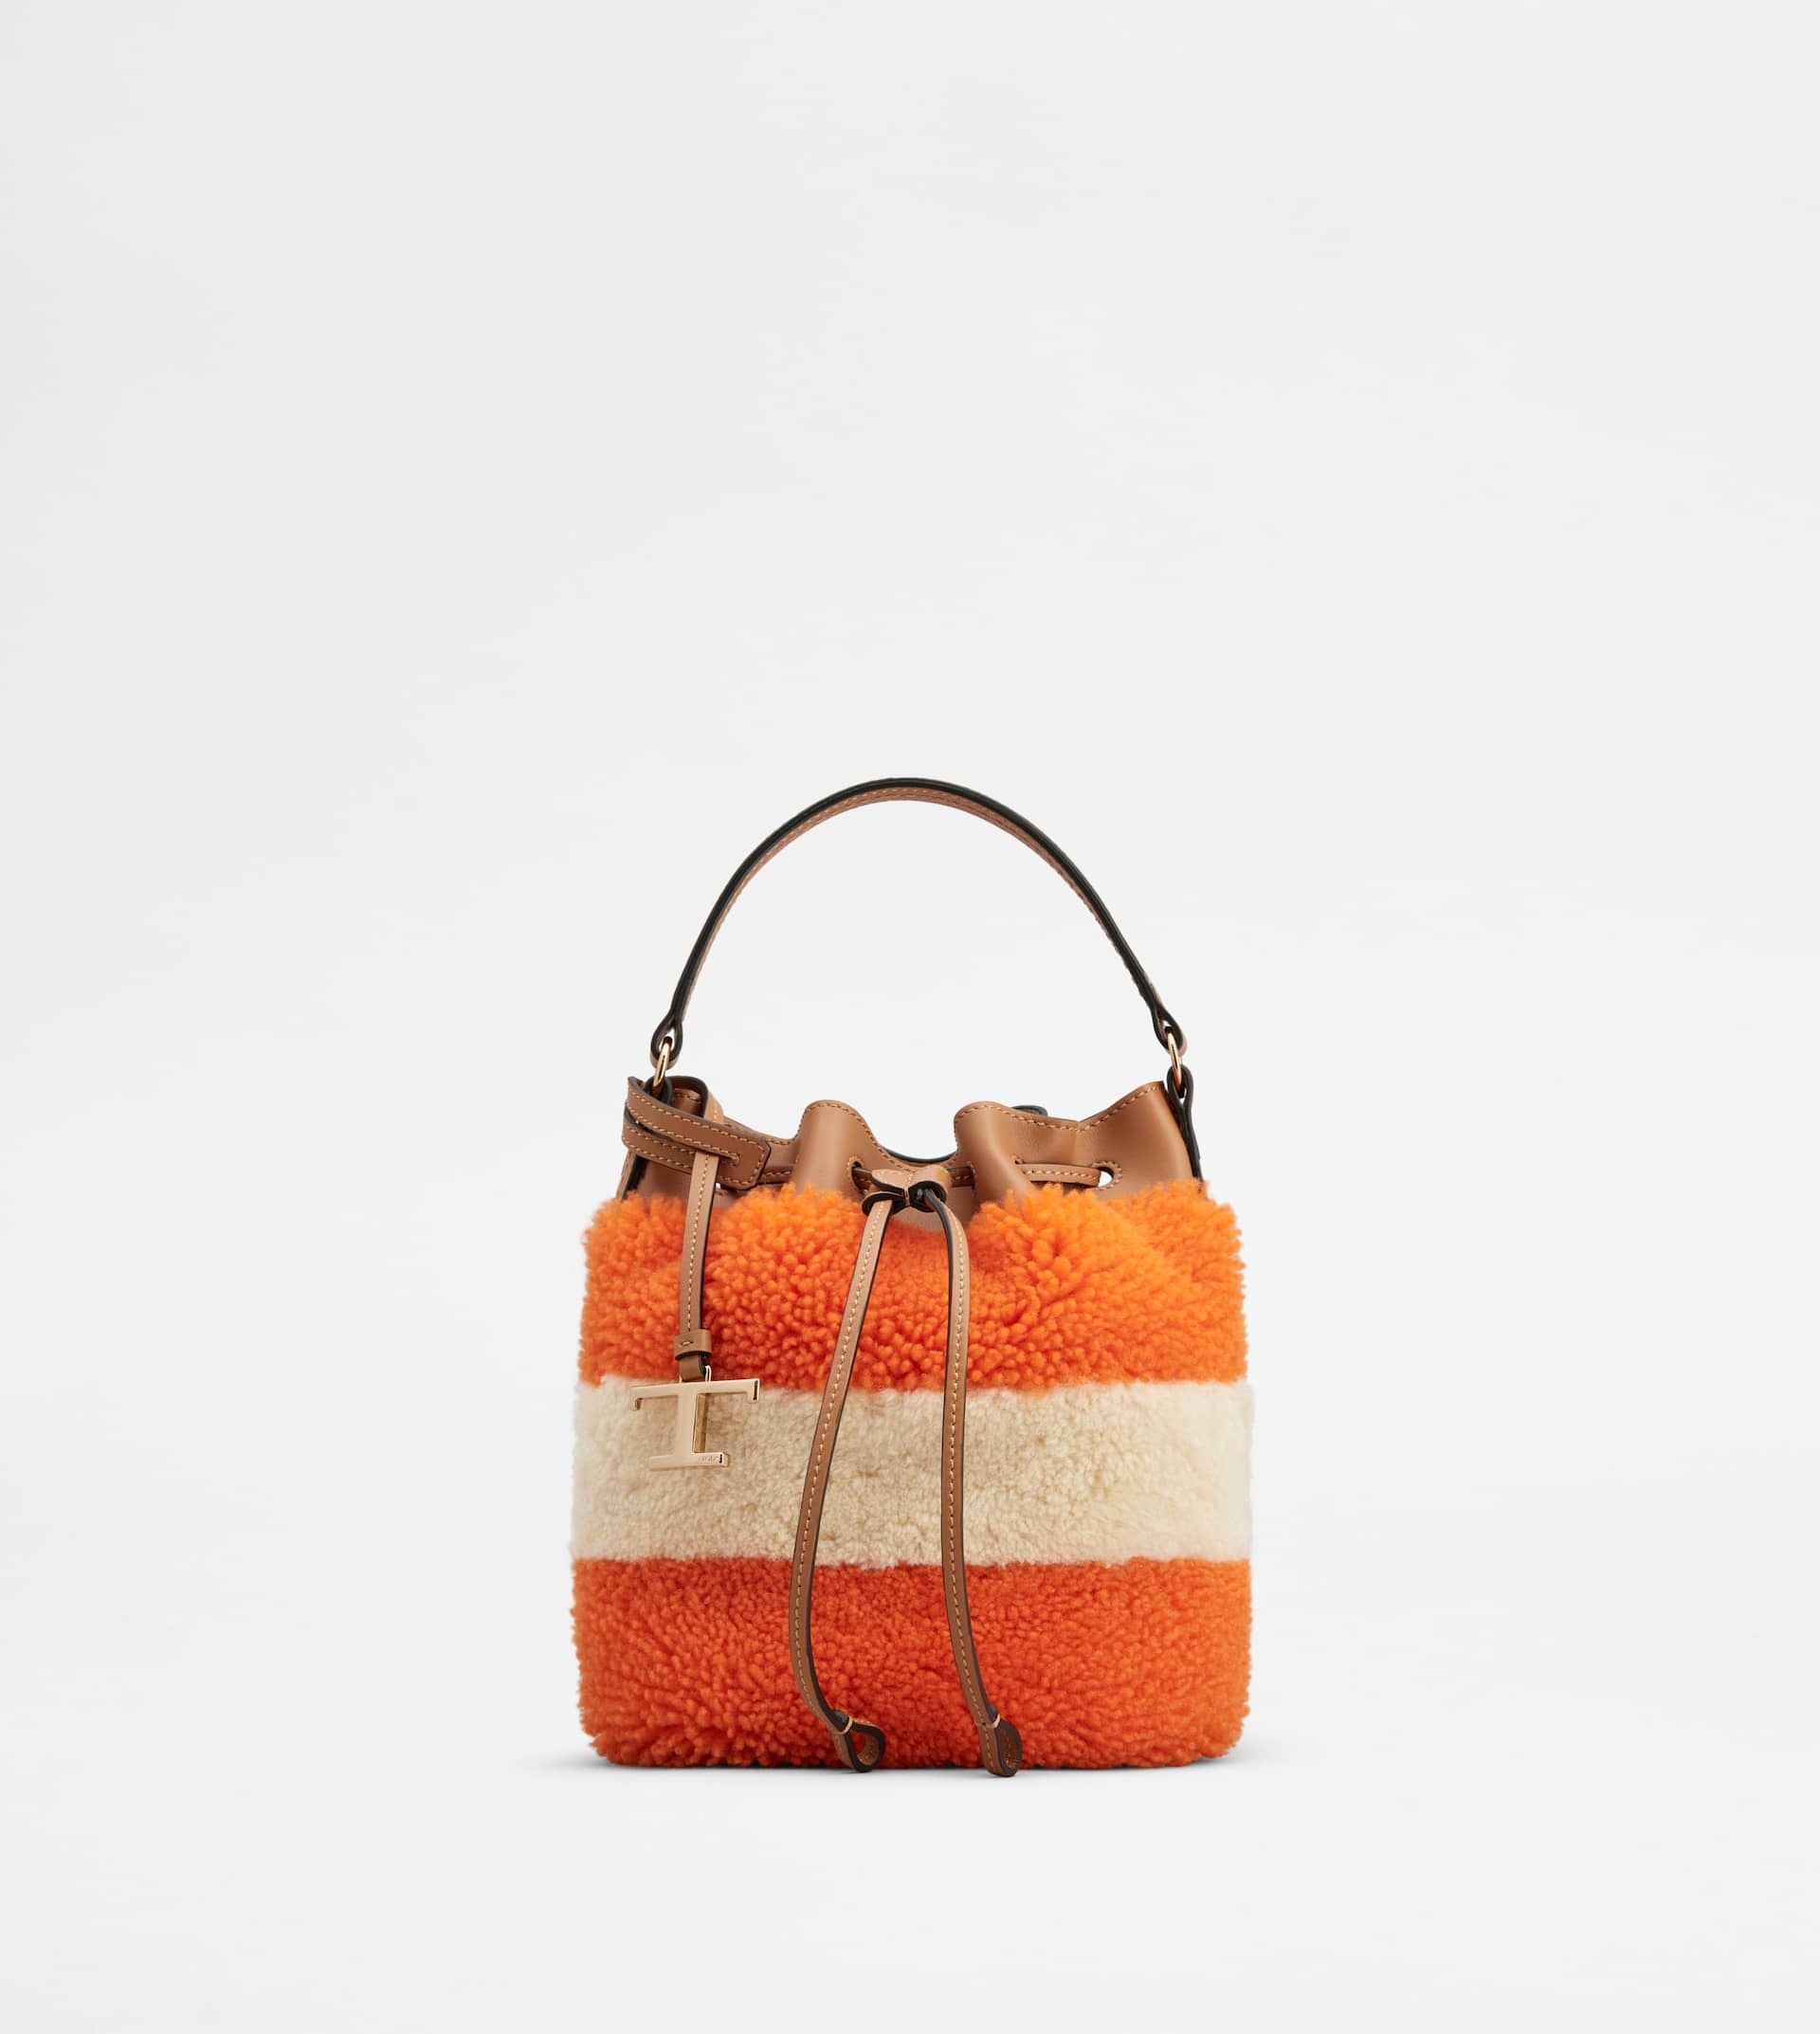 BUCKET BAG IN SHEEPSKIN AND LEATHER MICRO - ORANGE, OFF WHITE, BROWN - 1